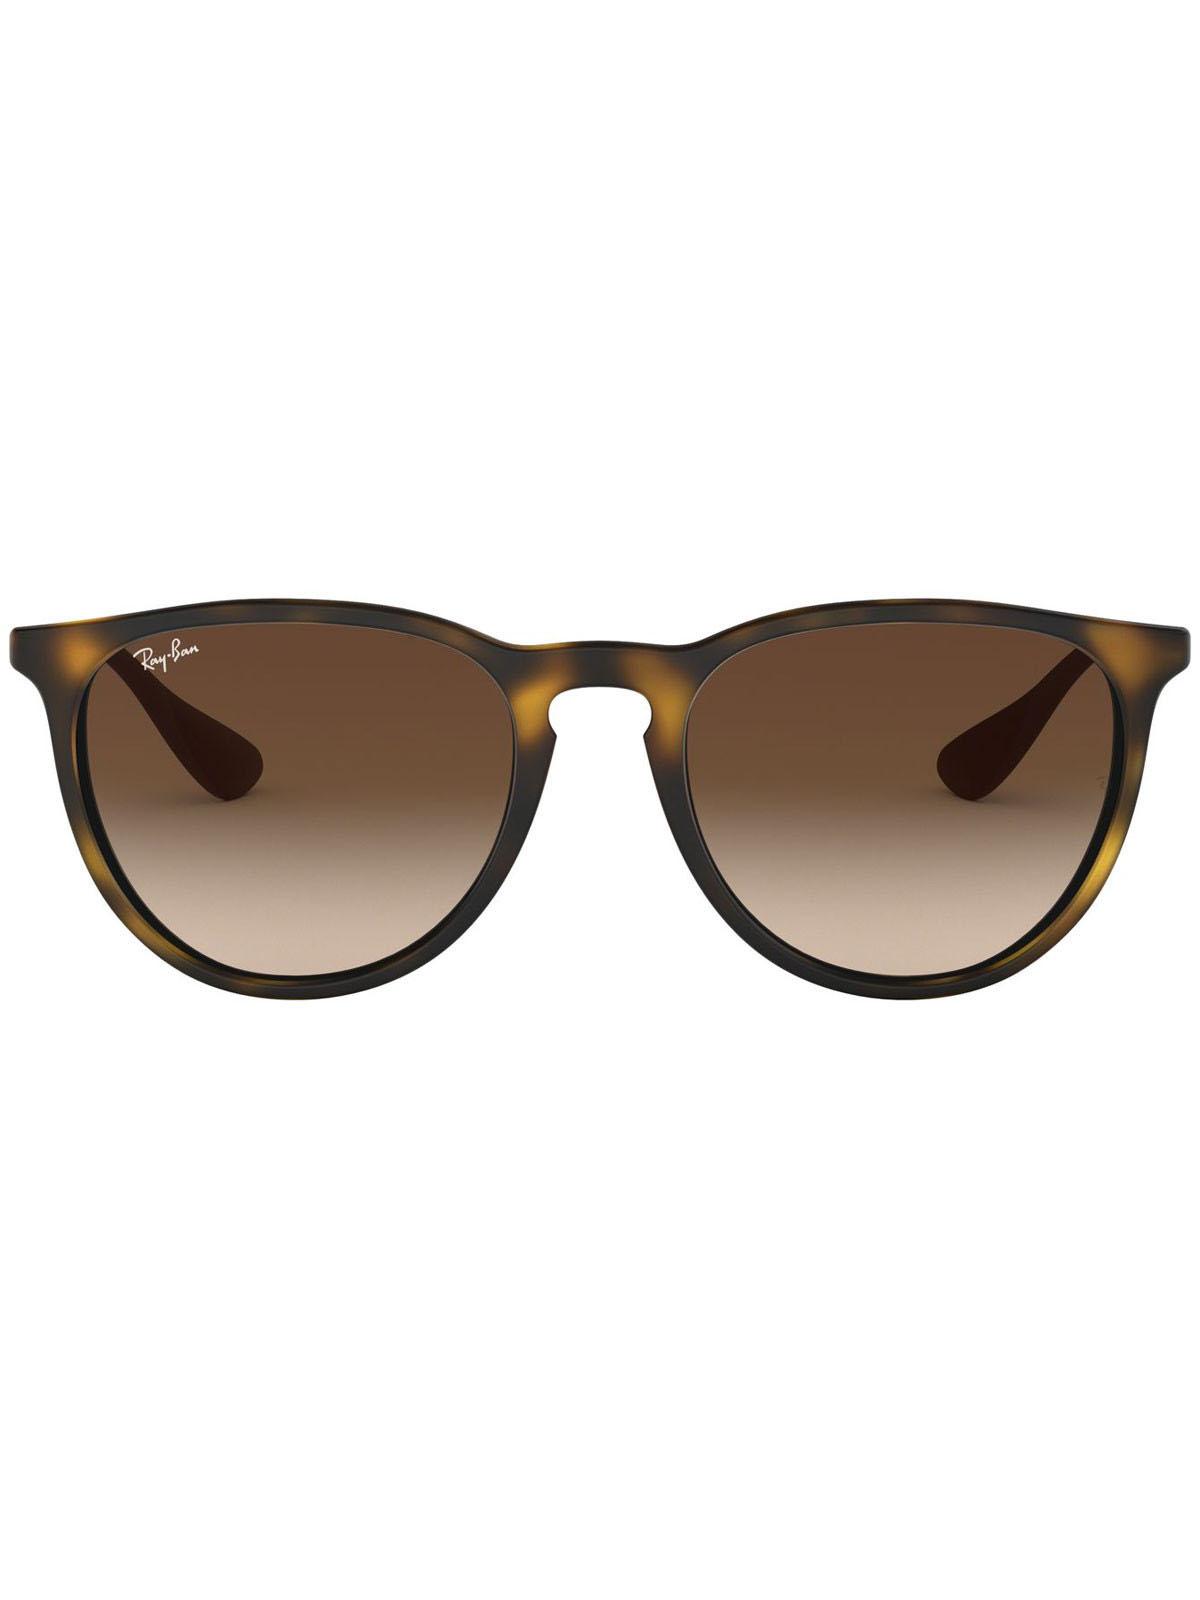 Ray-Ban Sunglasses - RB4171-865/13-54 - LifeStyle Collection